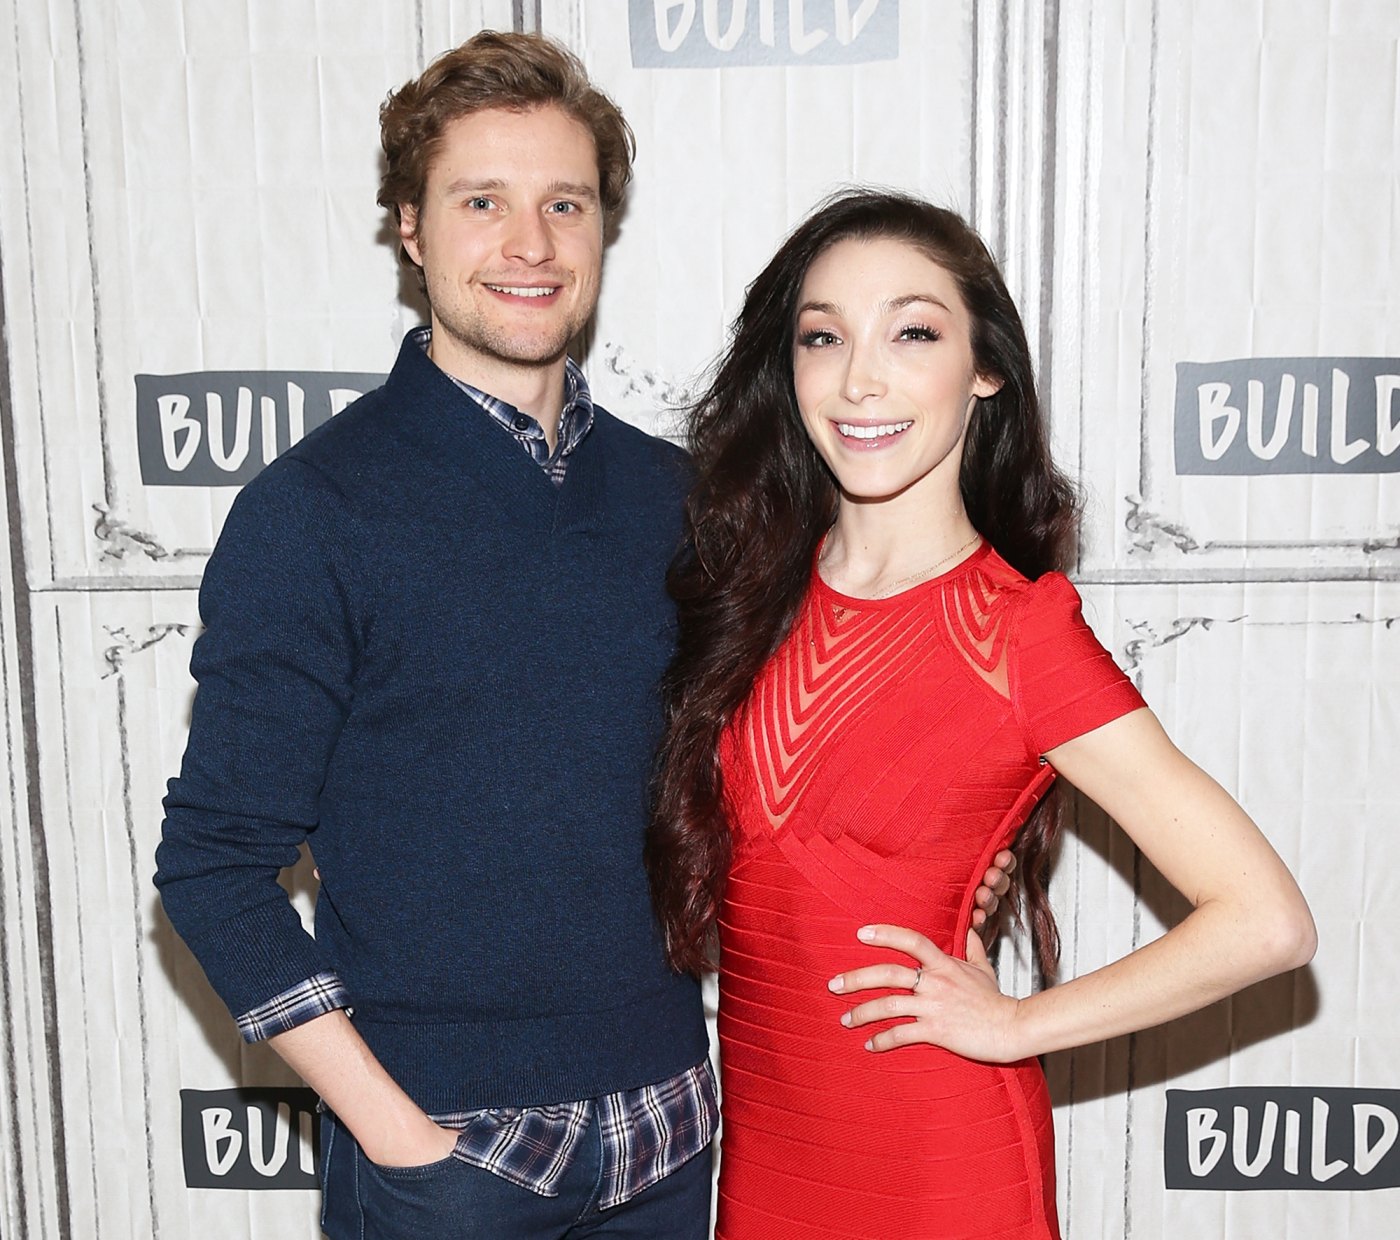 List 103+ Pictures are meryl davis and charlie white a couple Full HD, 2k, 4k